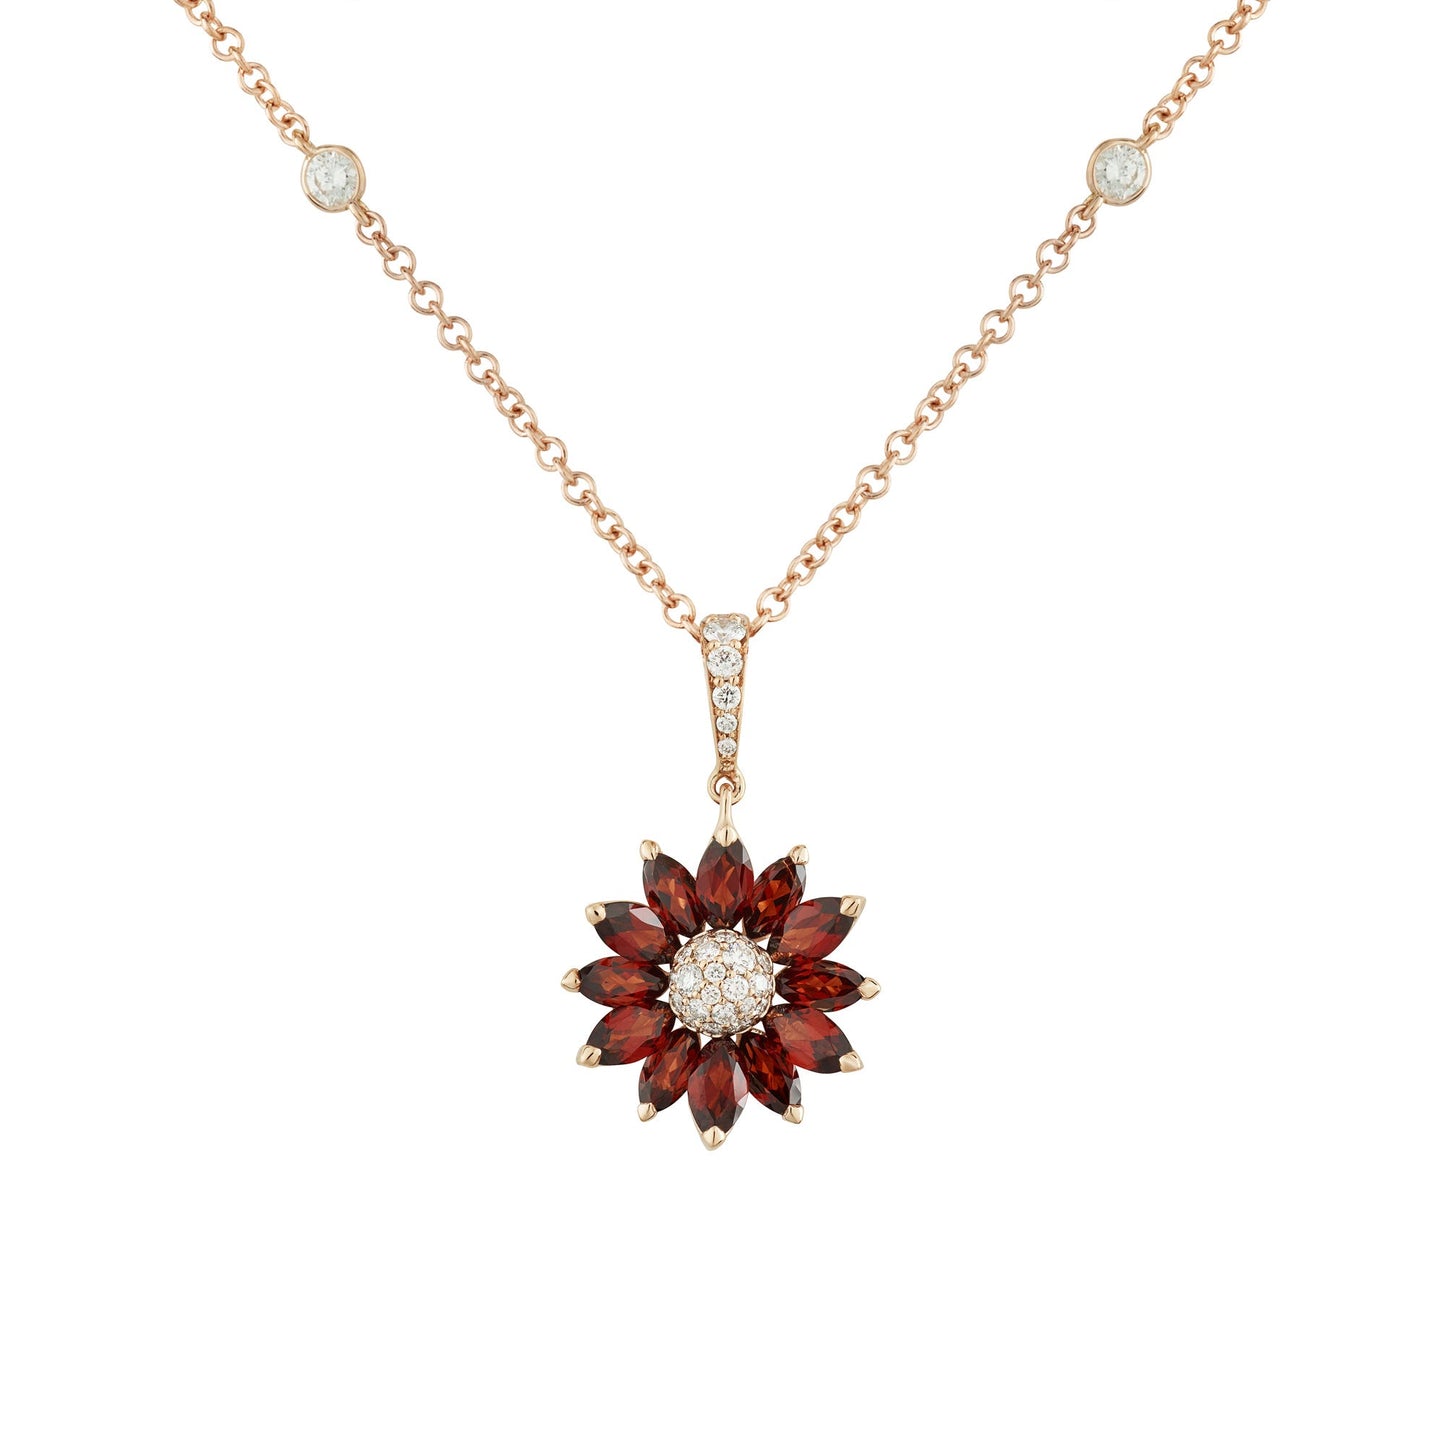 Daisy Small Pendant in 18ct Rose Gold with Garnet and Diamonds